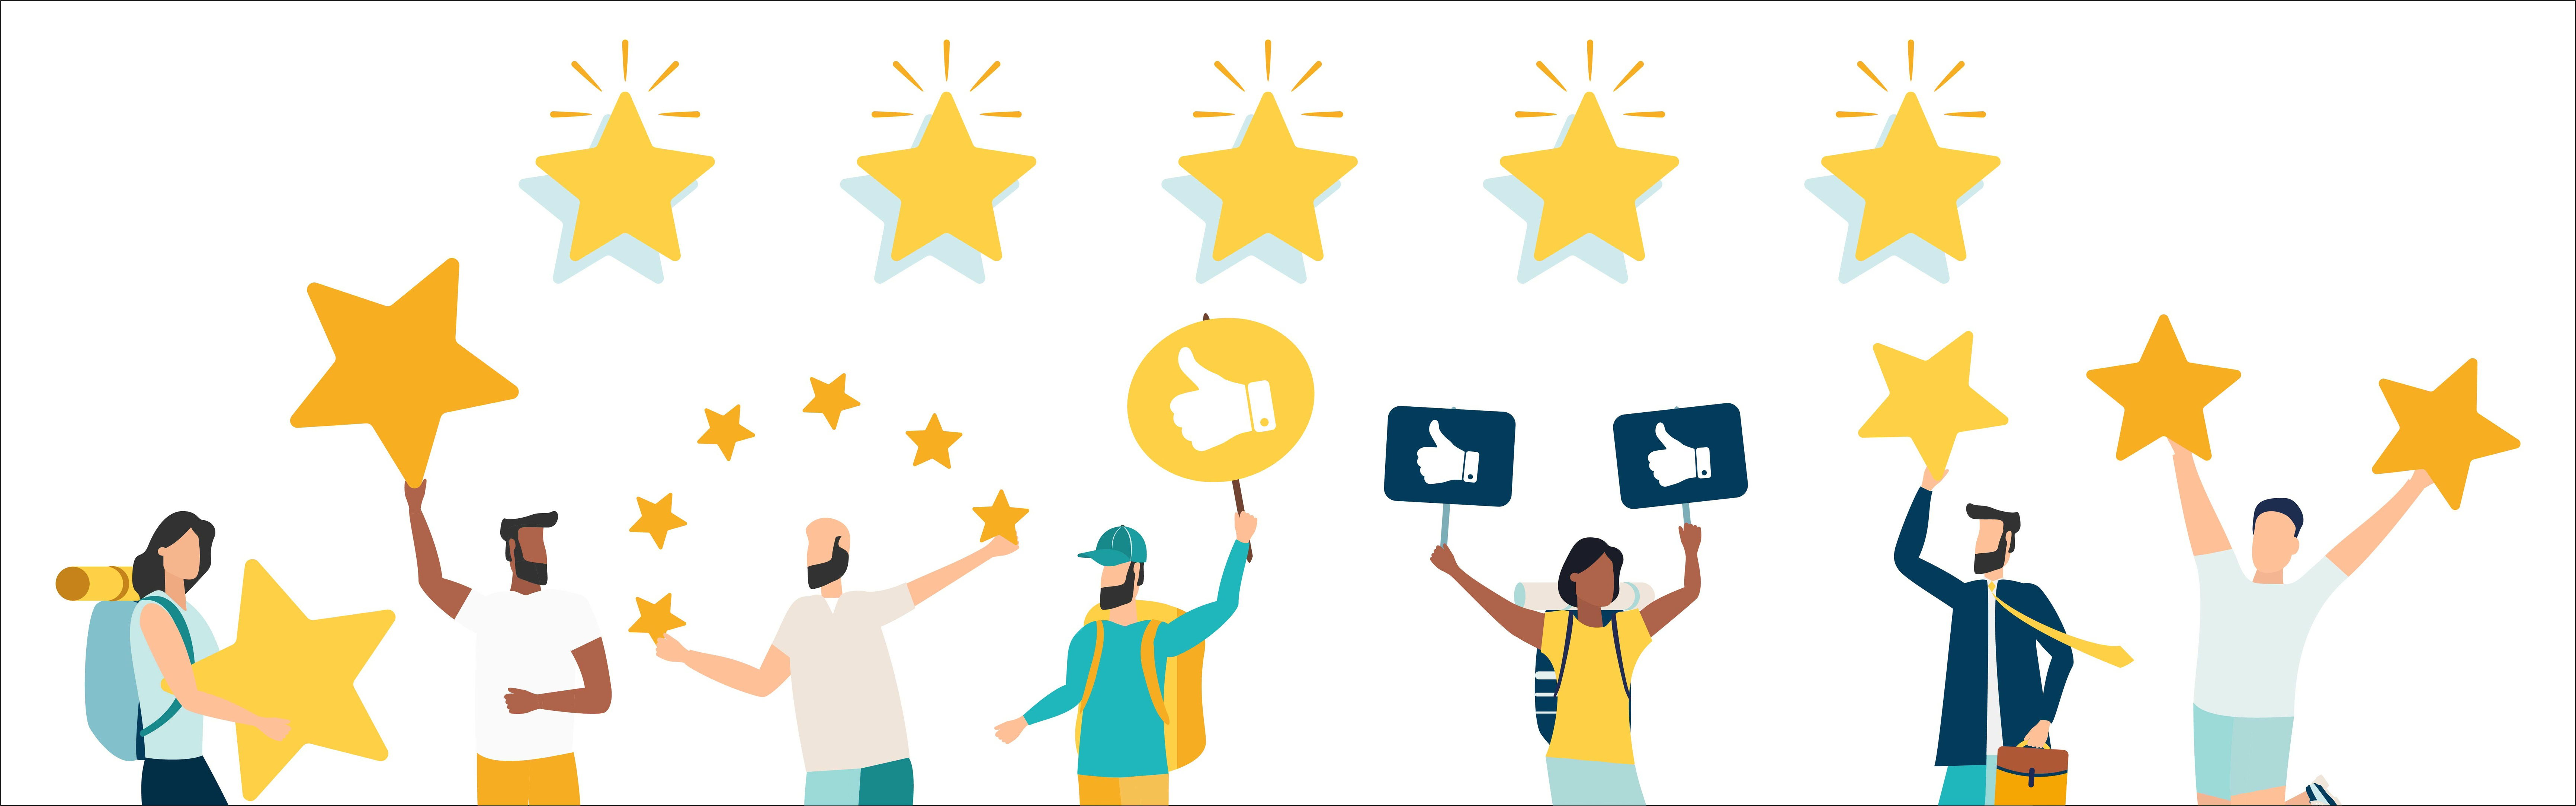 The image is a digital illustration featuring a group of stylized, cartoon-like figures celebrating with raised hands and star graphics, set against a white background.